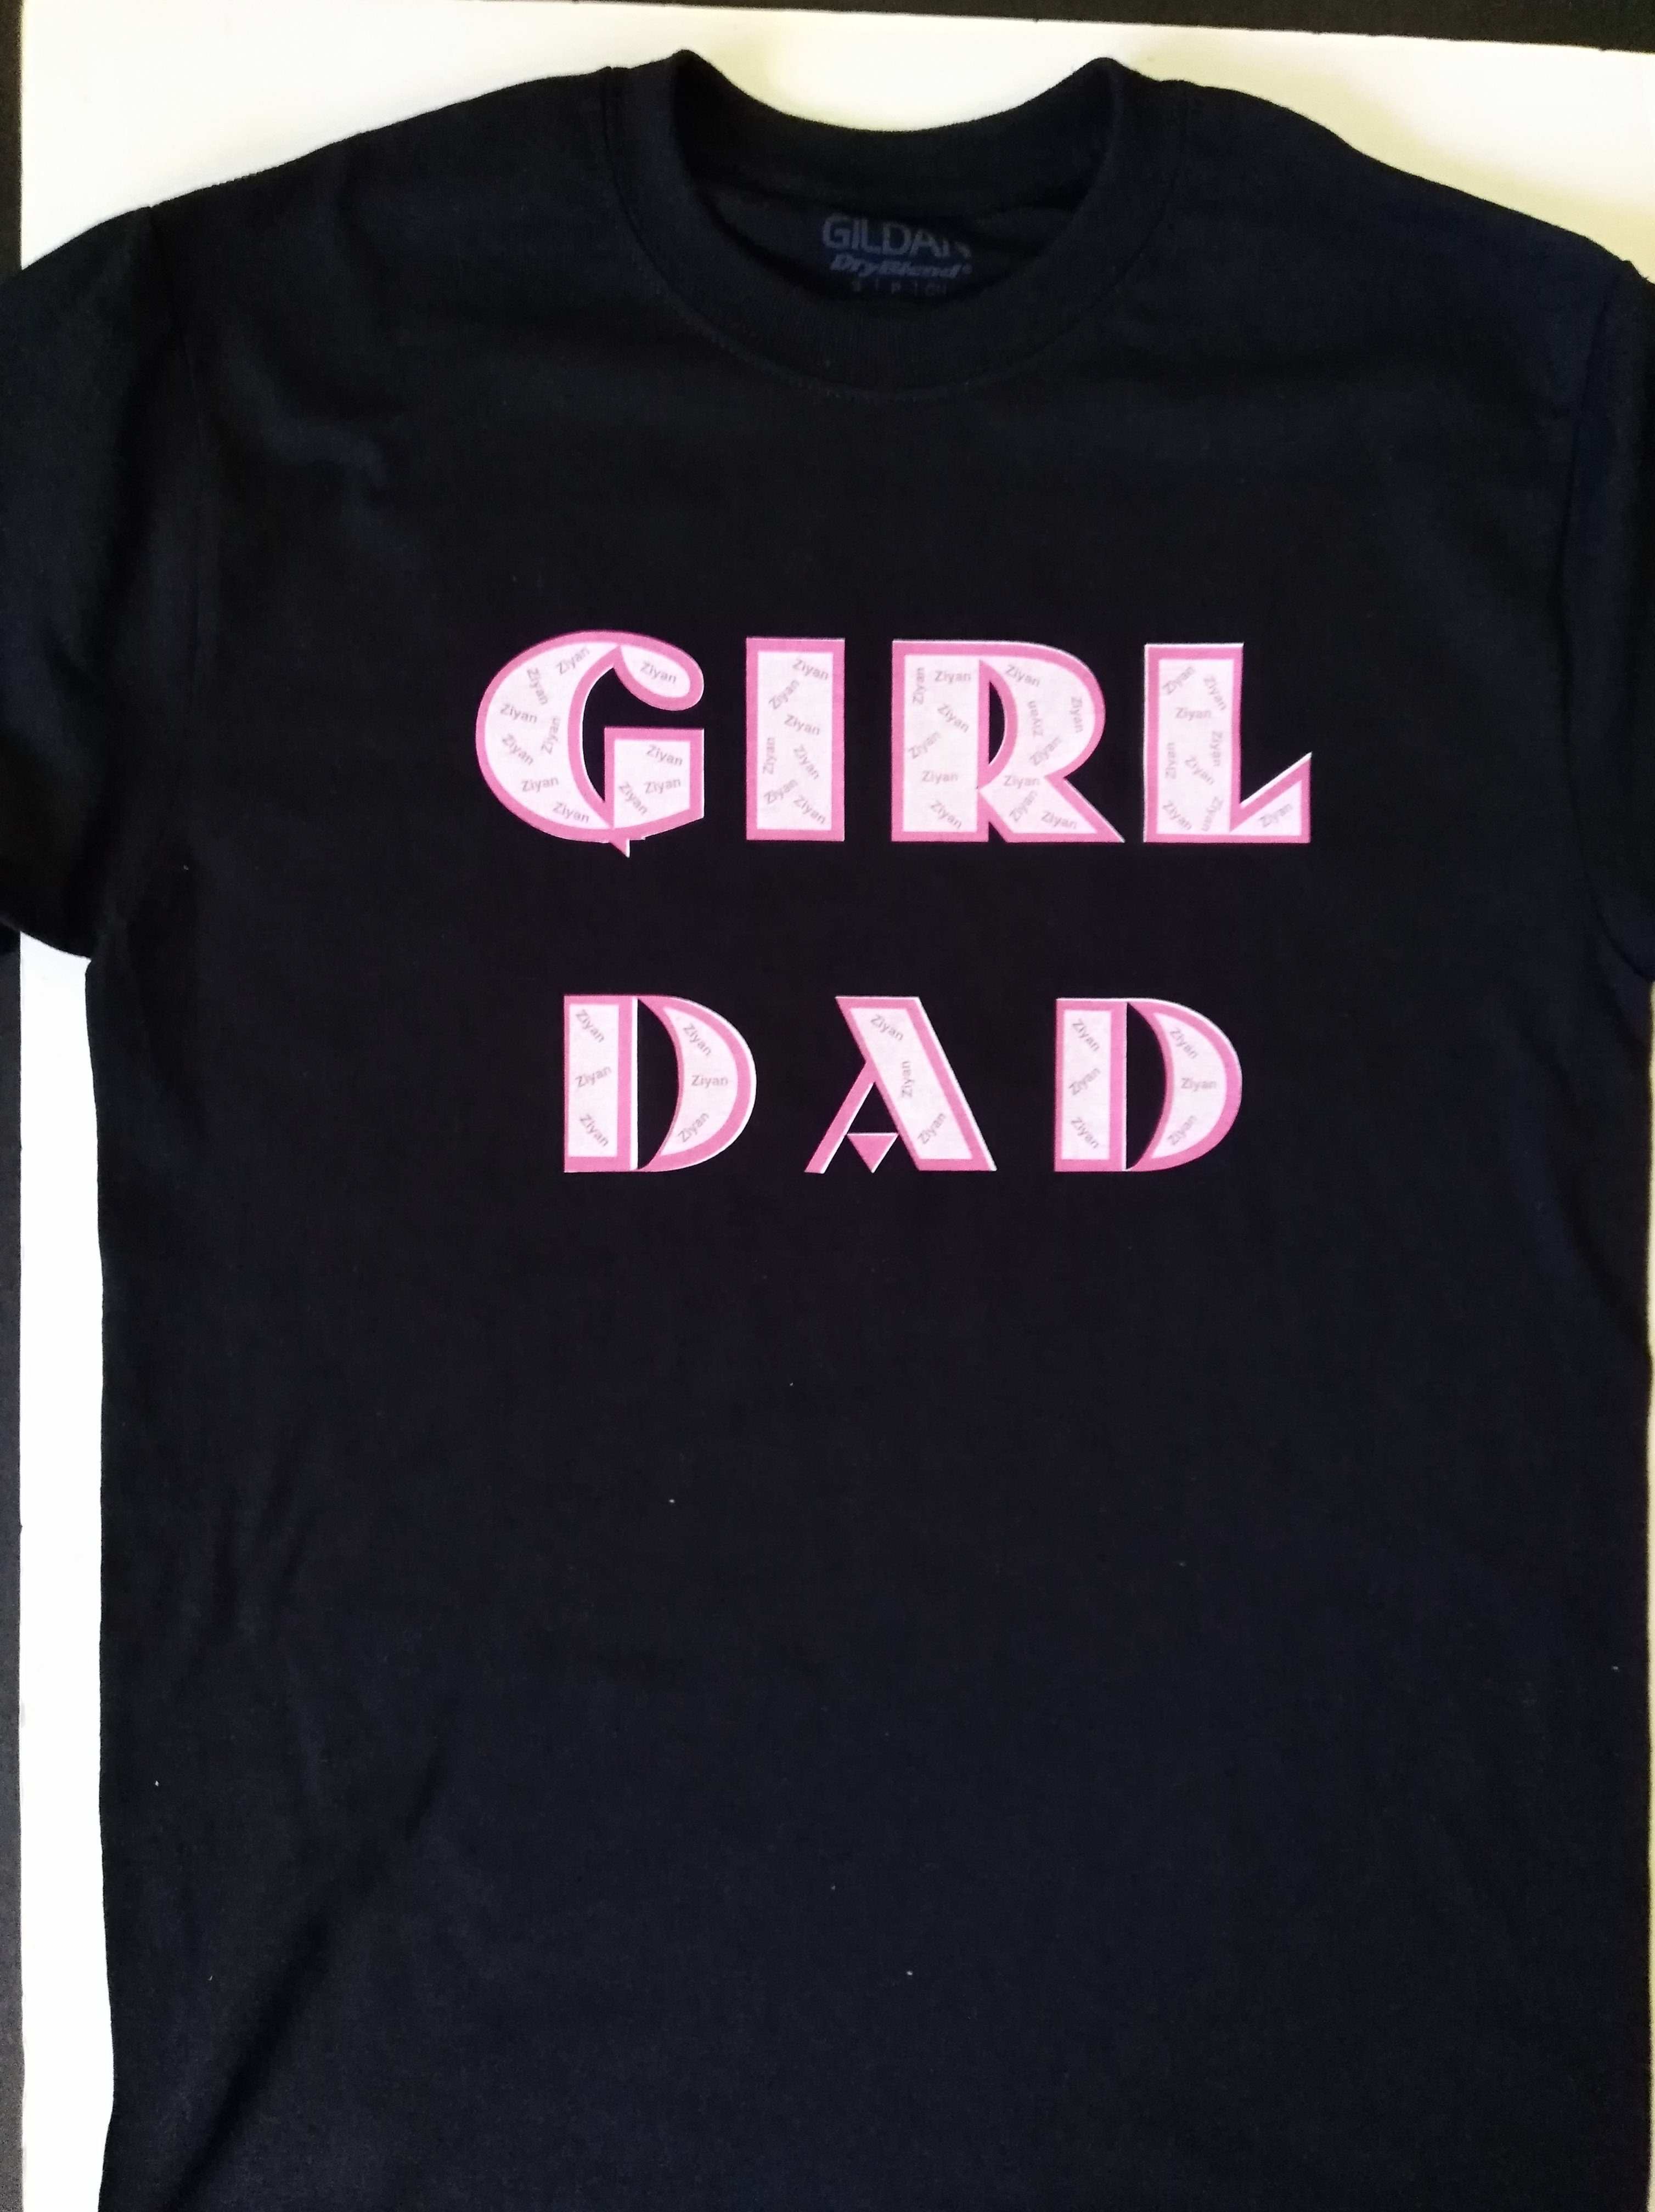 A custom order for dad to be of a girl. The girl's name is inside each letter